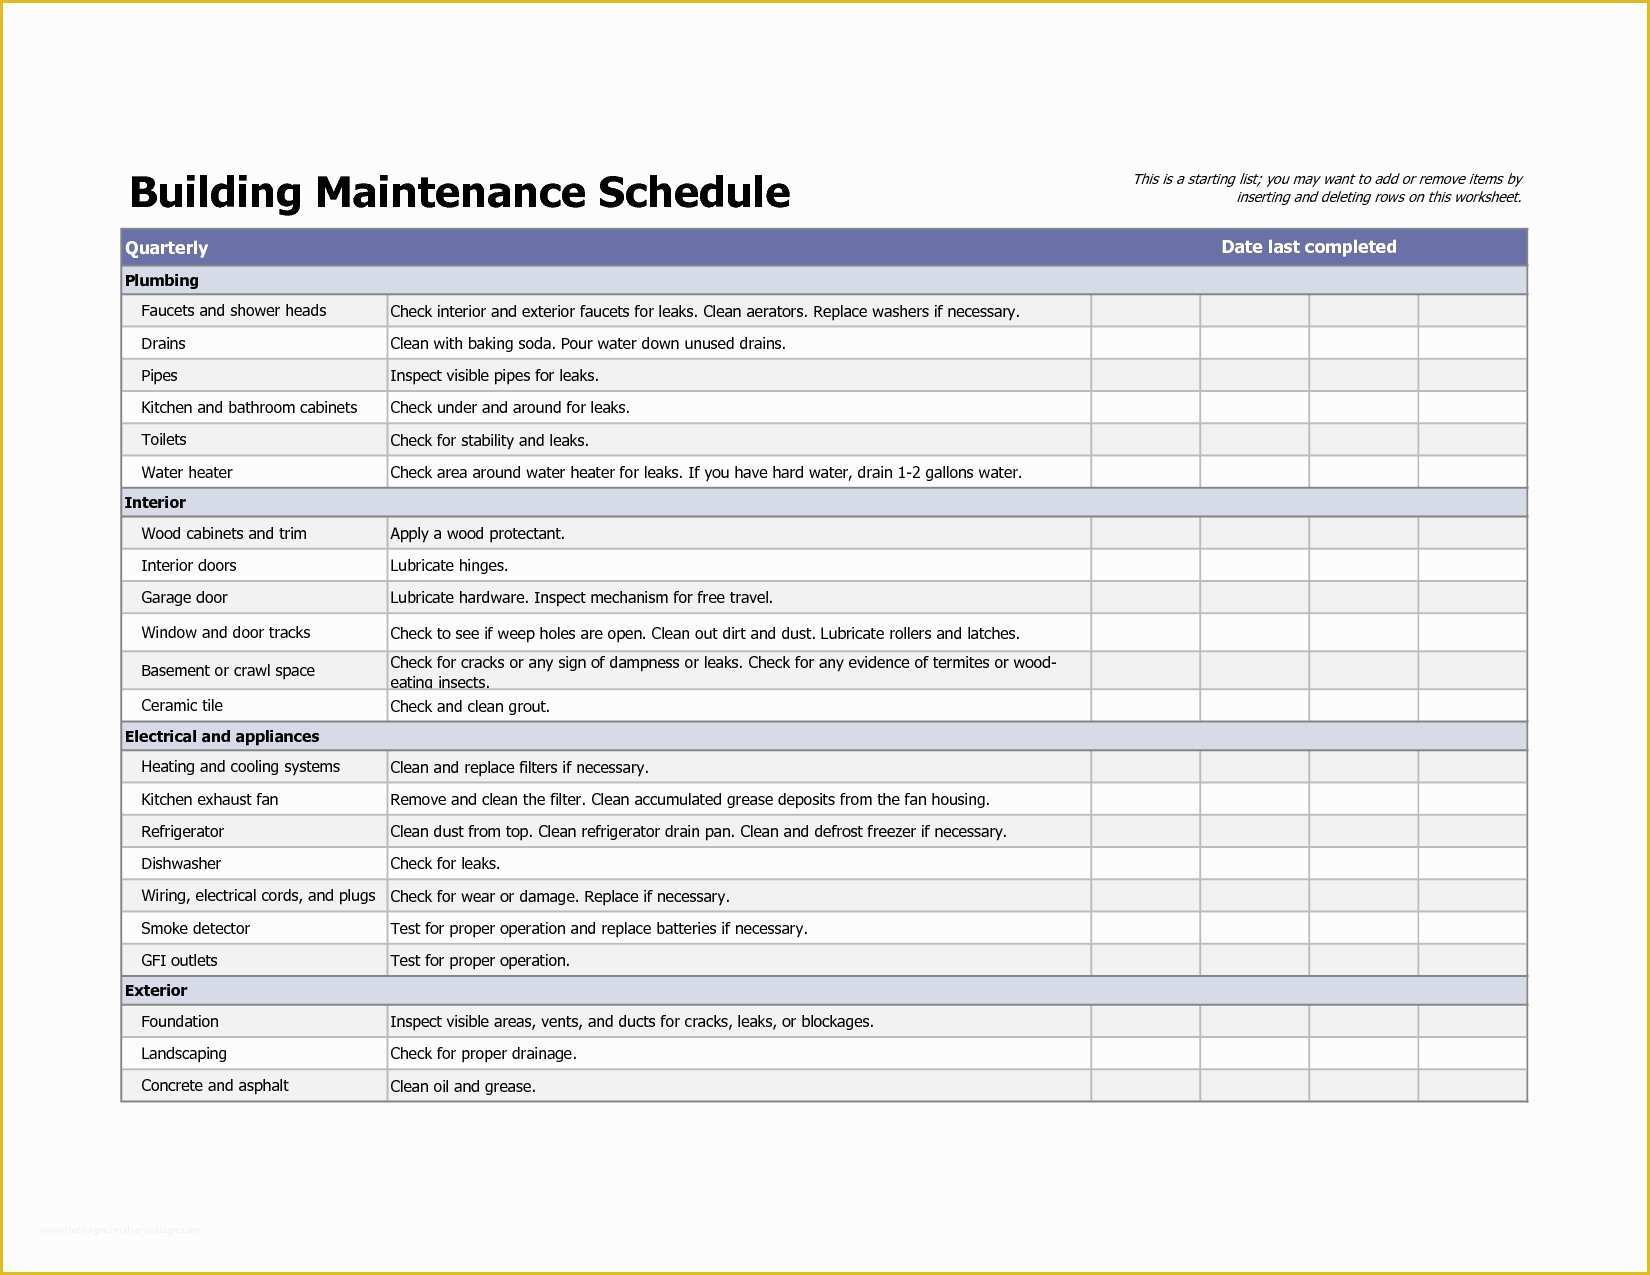 Free Maintenance Planning and Scheduling Templates Excel Of Building Maintenance Schedule Excel Template